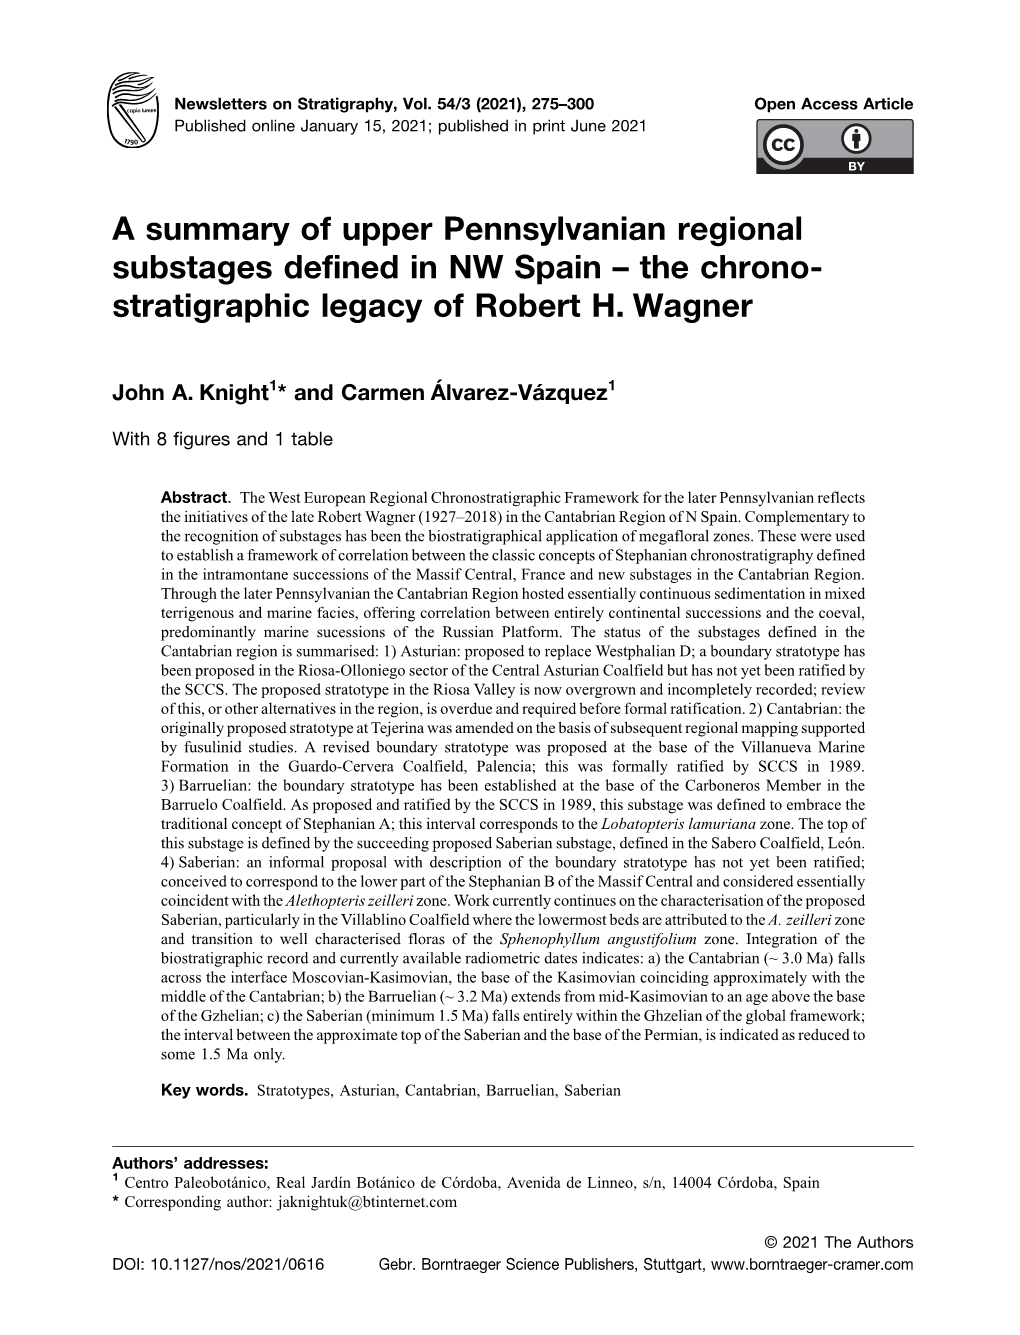 A Summary of Upper Pennsylvanian Regional Substages Defined in NW Spain – the Chrono- Stratigraphic Legacy of Robert H